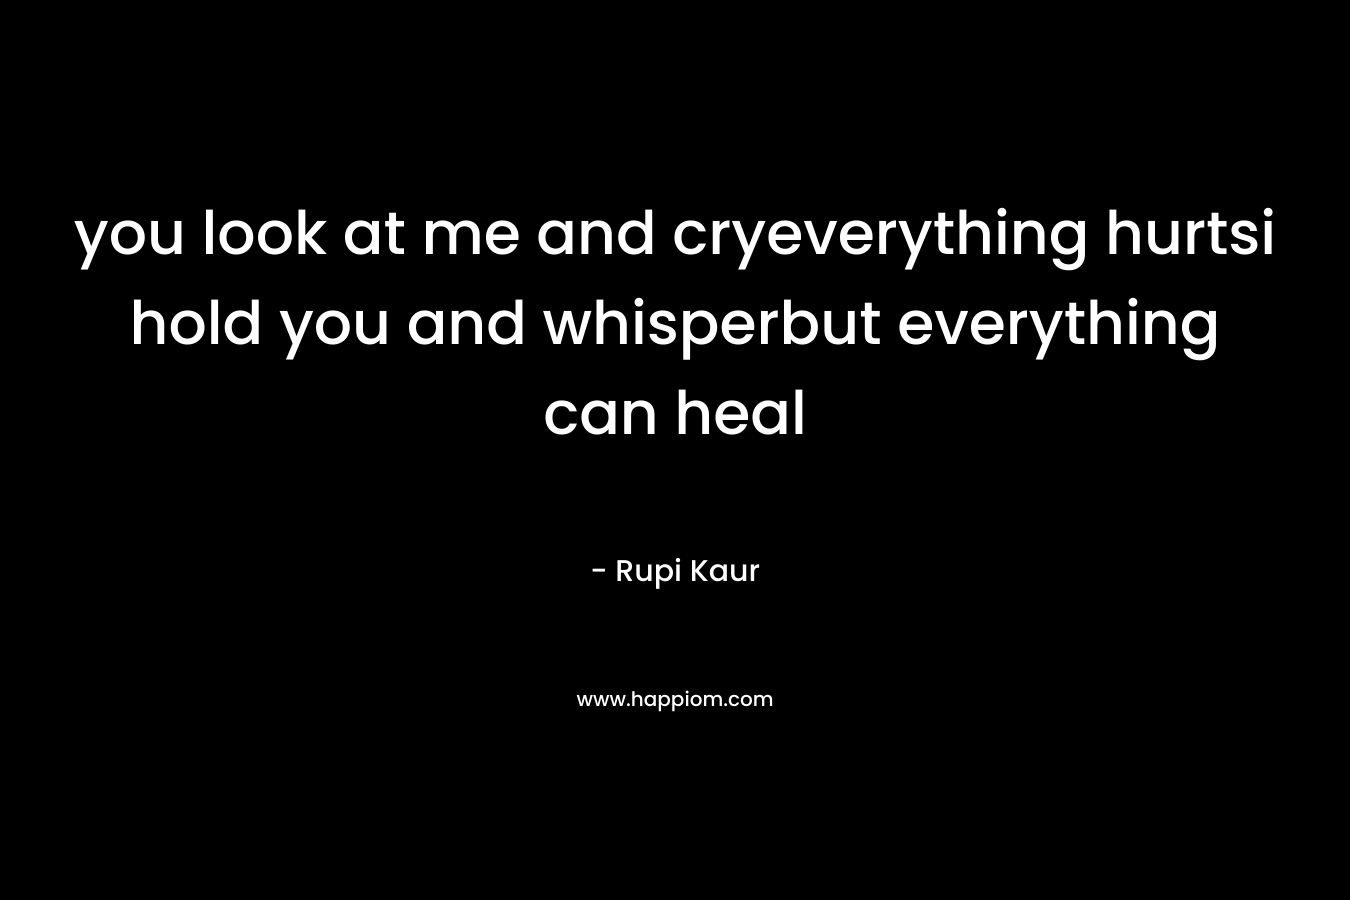 you look at me and cryeverything hurtsi hold you and whisperbut everything can heal – Rupi Kaur